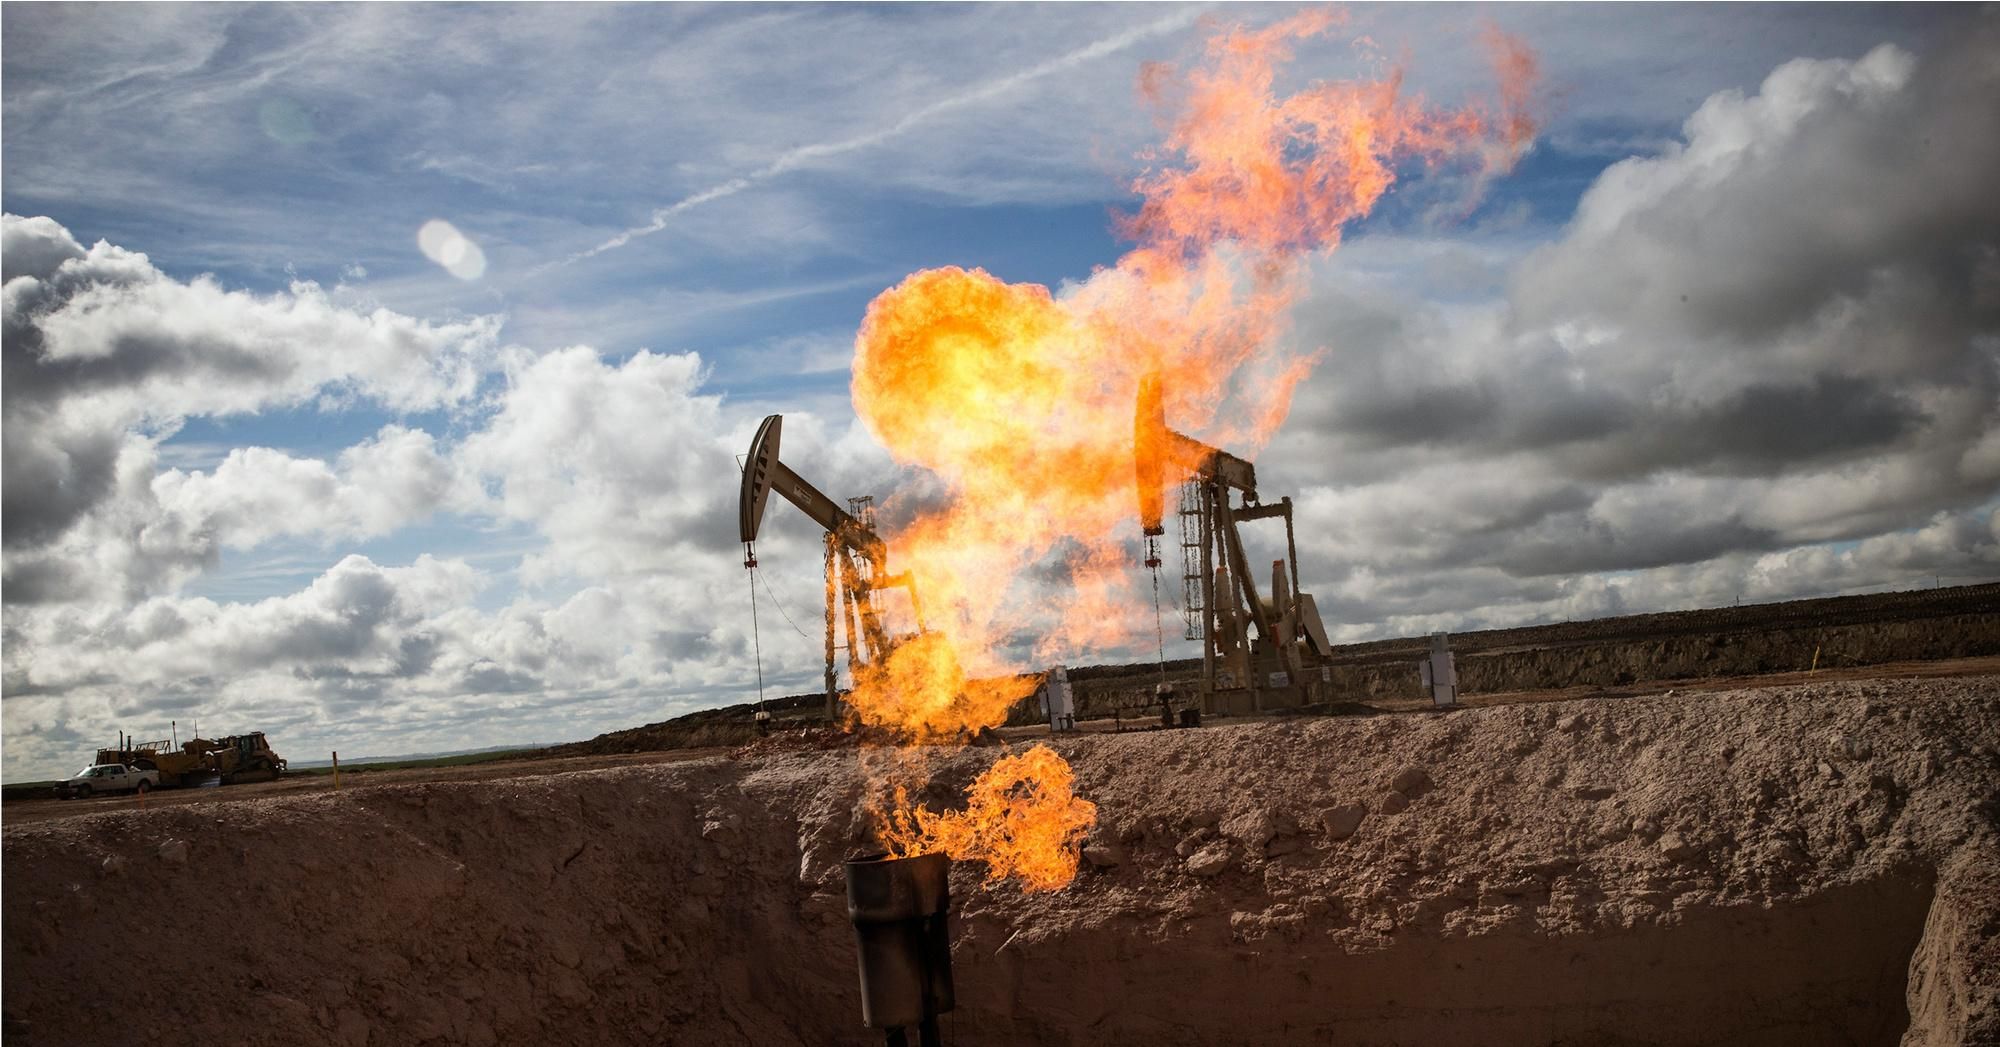 A gas flare is seen at an oil well site on July 26, 2013 outside Williston, North Dakota. Gas flares are created when excess flammable gases are released by pressure release valves during the drilling for oil and natural gas. (Photo: Andrew Burton/Getty Images) 